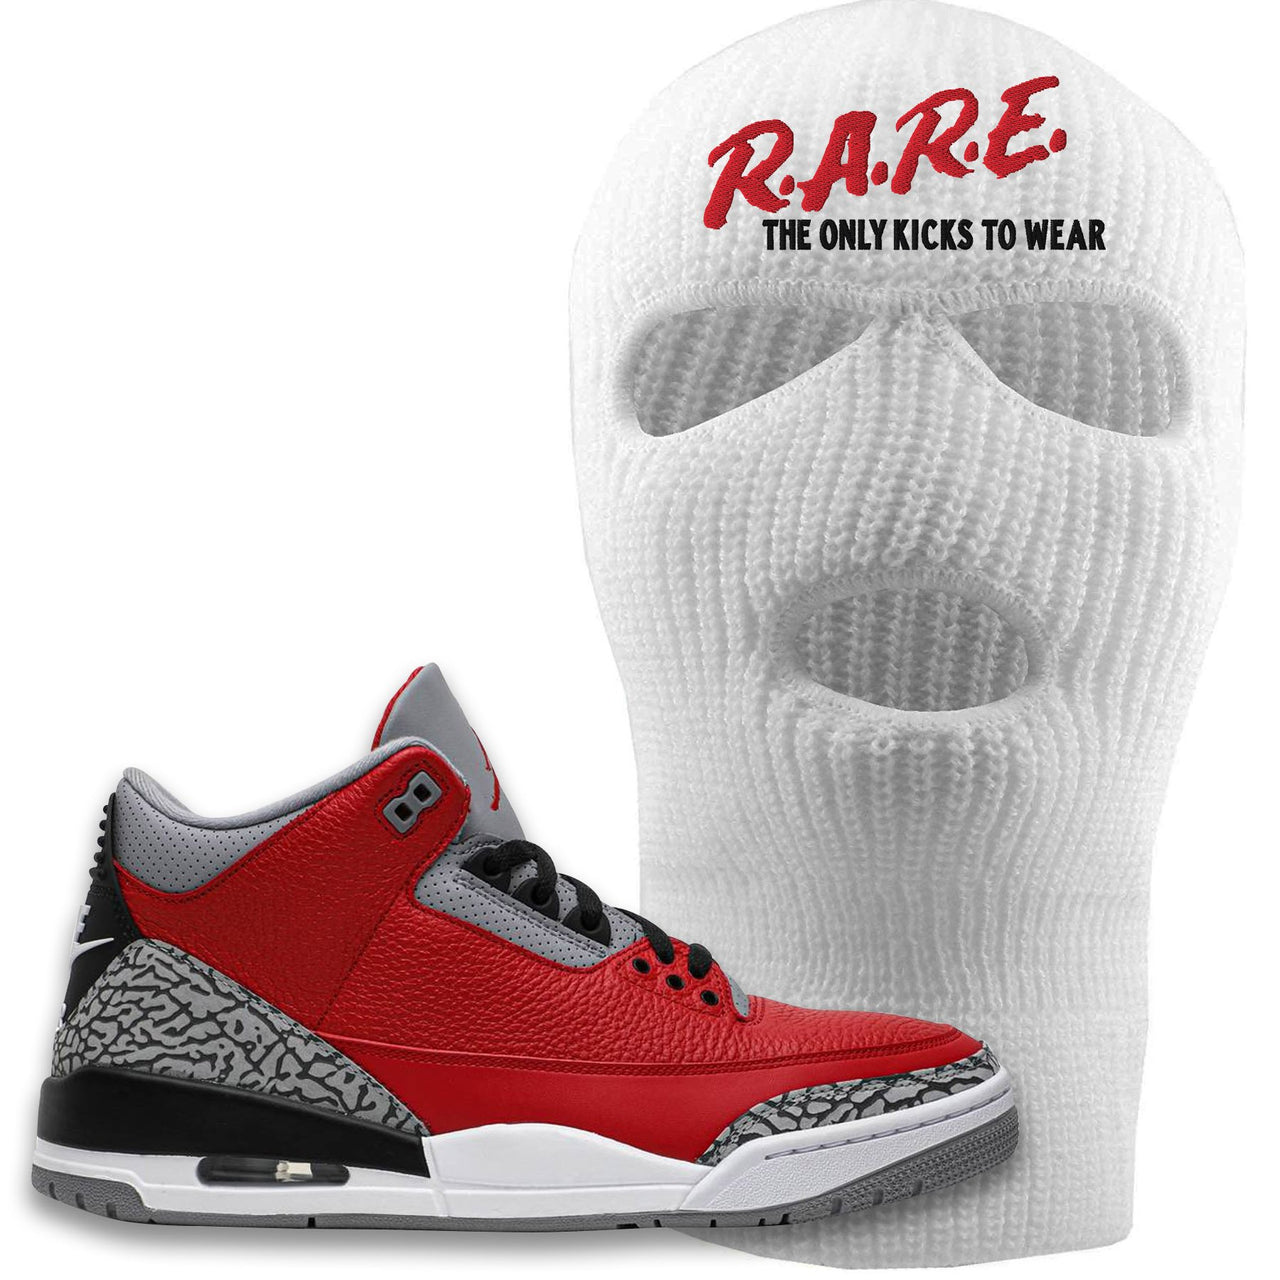 Jordan 3 Red Cement Chicago All-Star Sneaker White Ski Mask | Winter Mask to match Jordan 3 All Star Red Cement Shoes | Rare